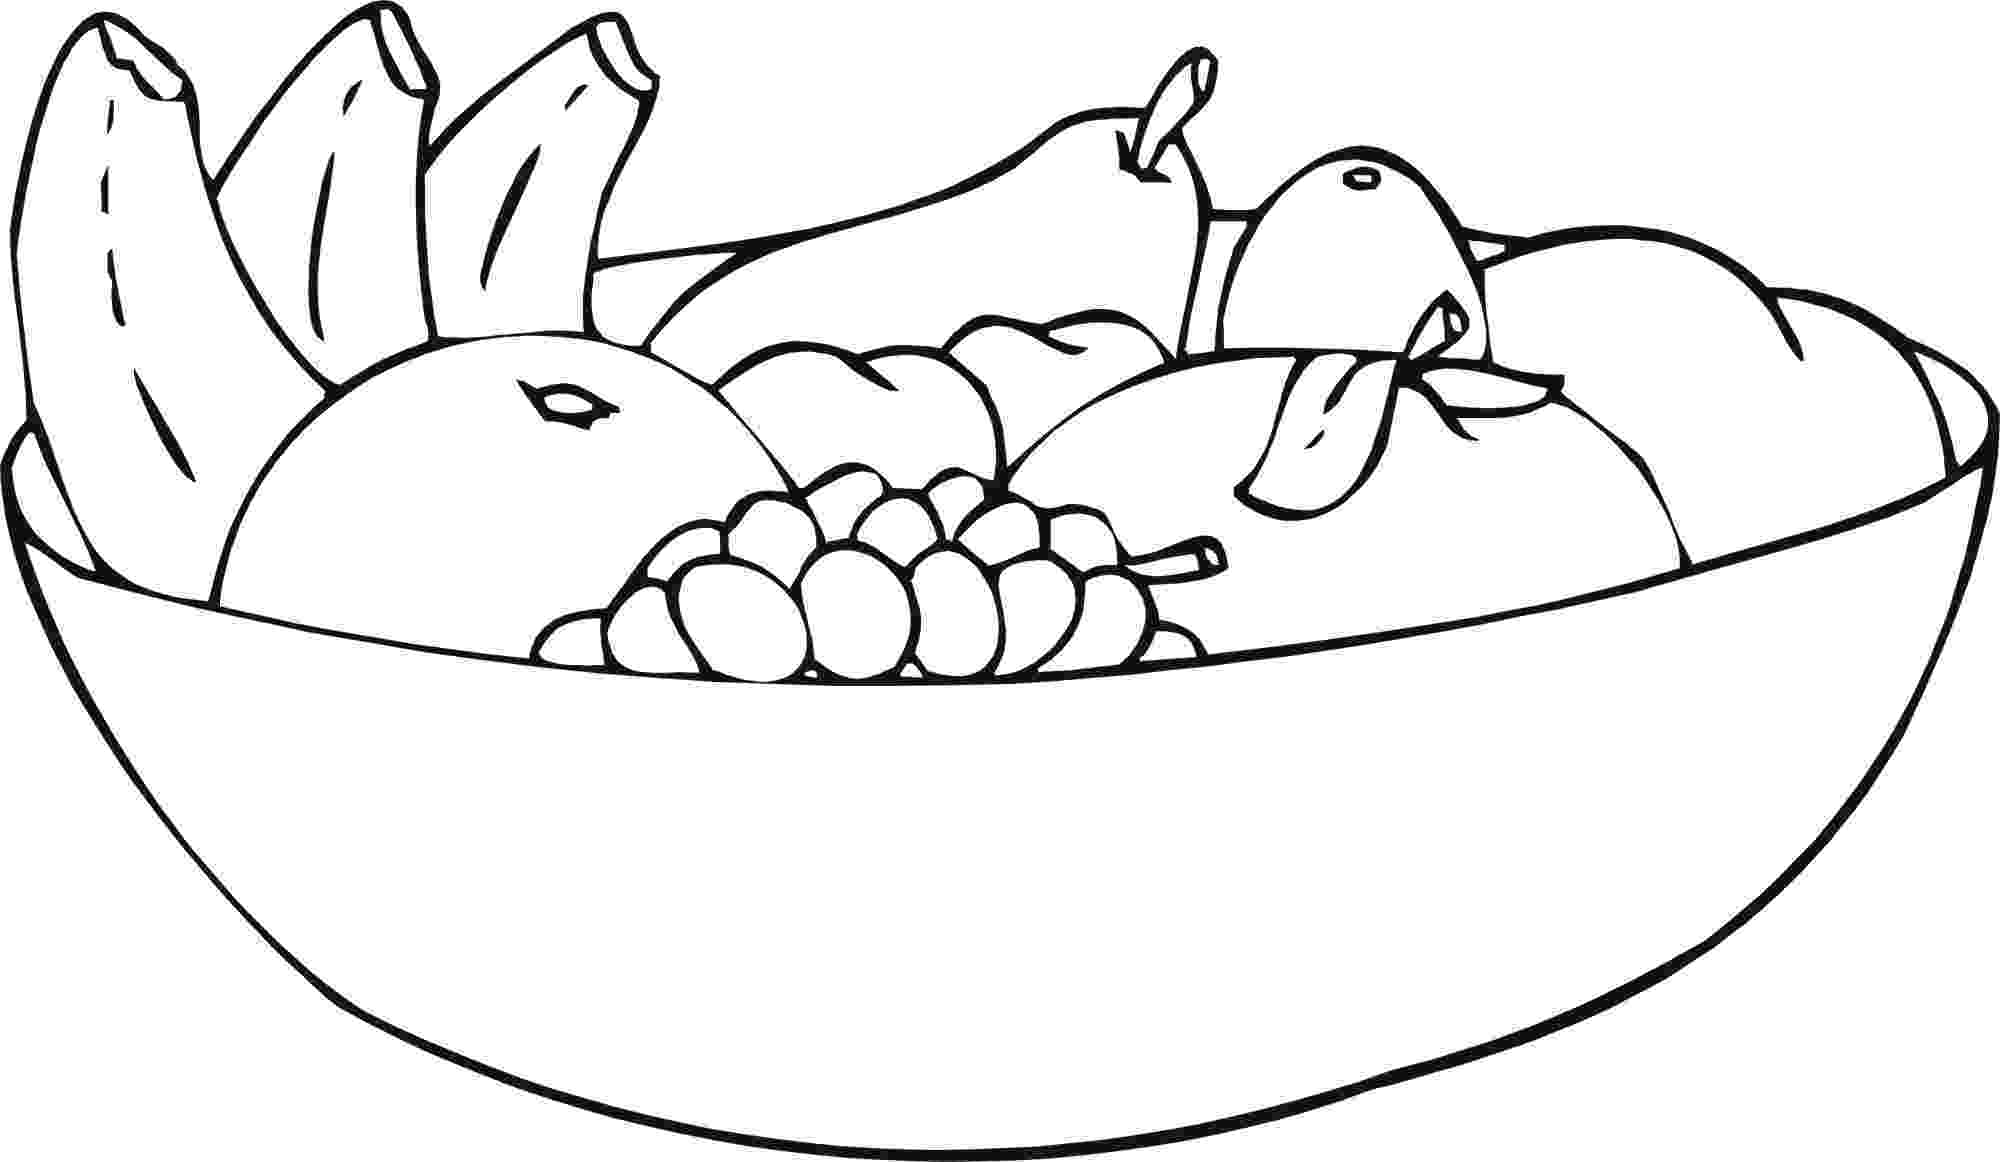 fruit coloring pages free printable fruit coloring pages for kids coloring fruit pages 